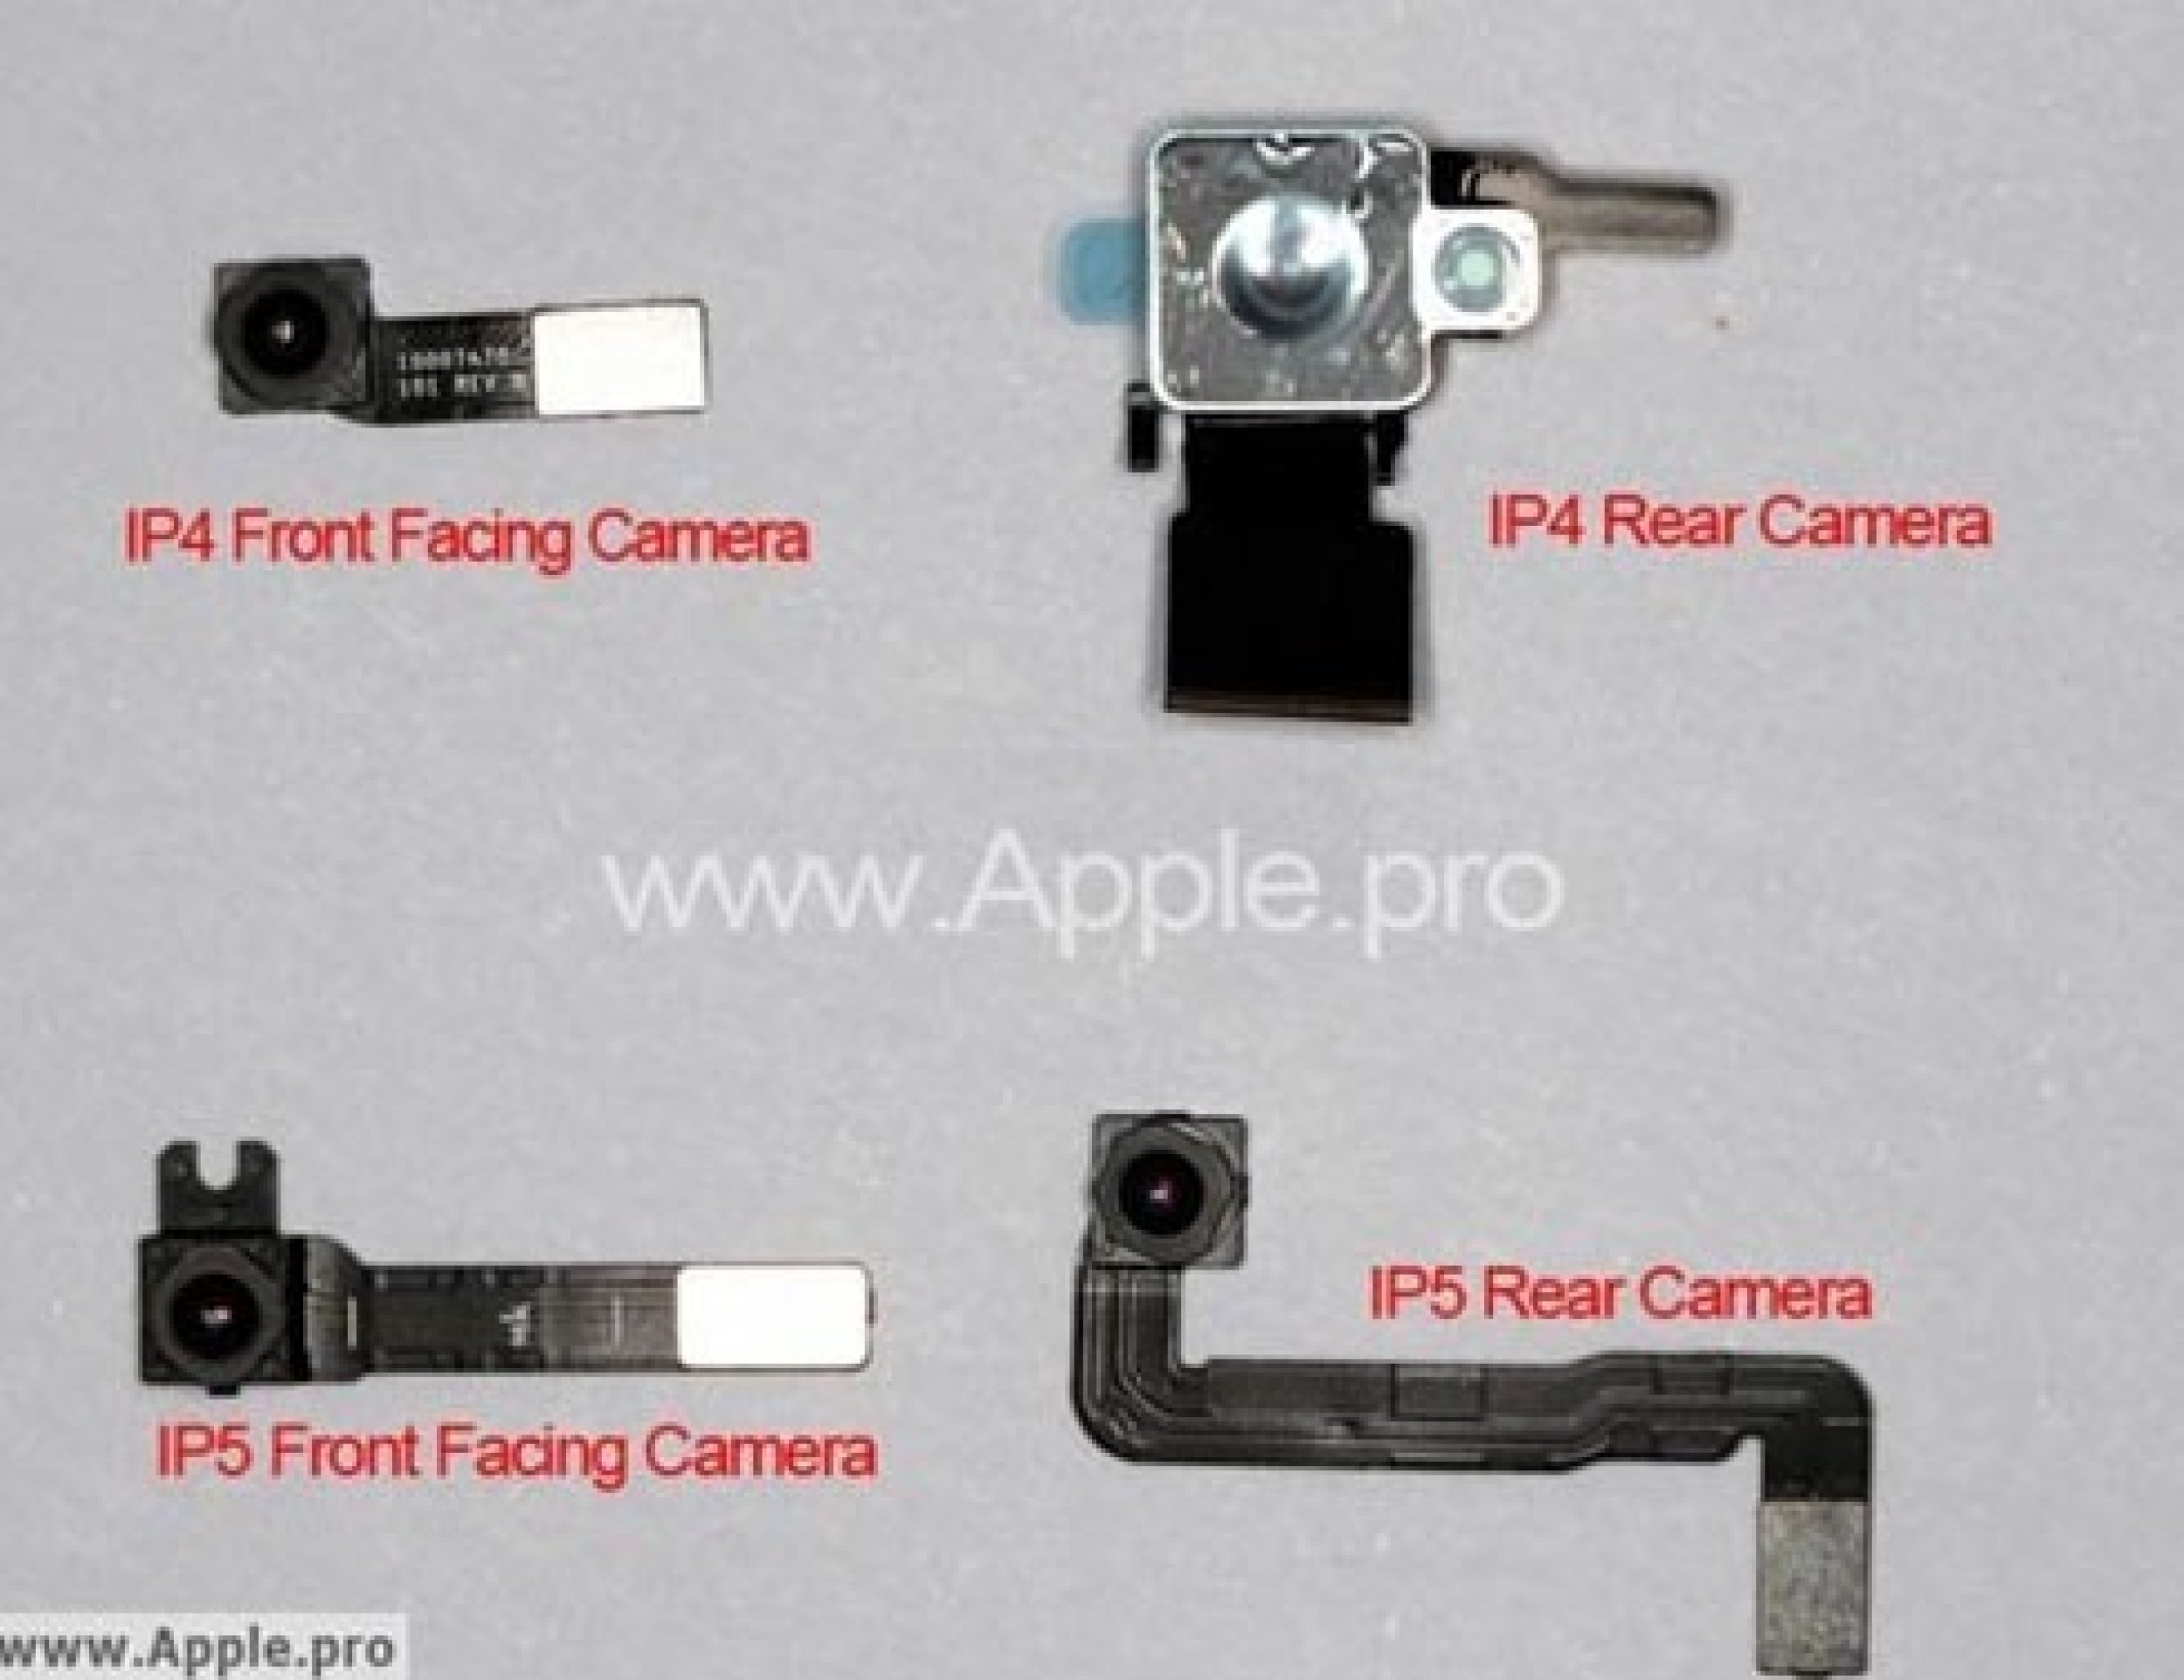 Top 10 Most-Wanted iPhone 5 Features PHOTOS